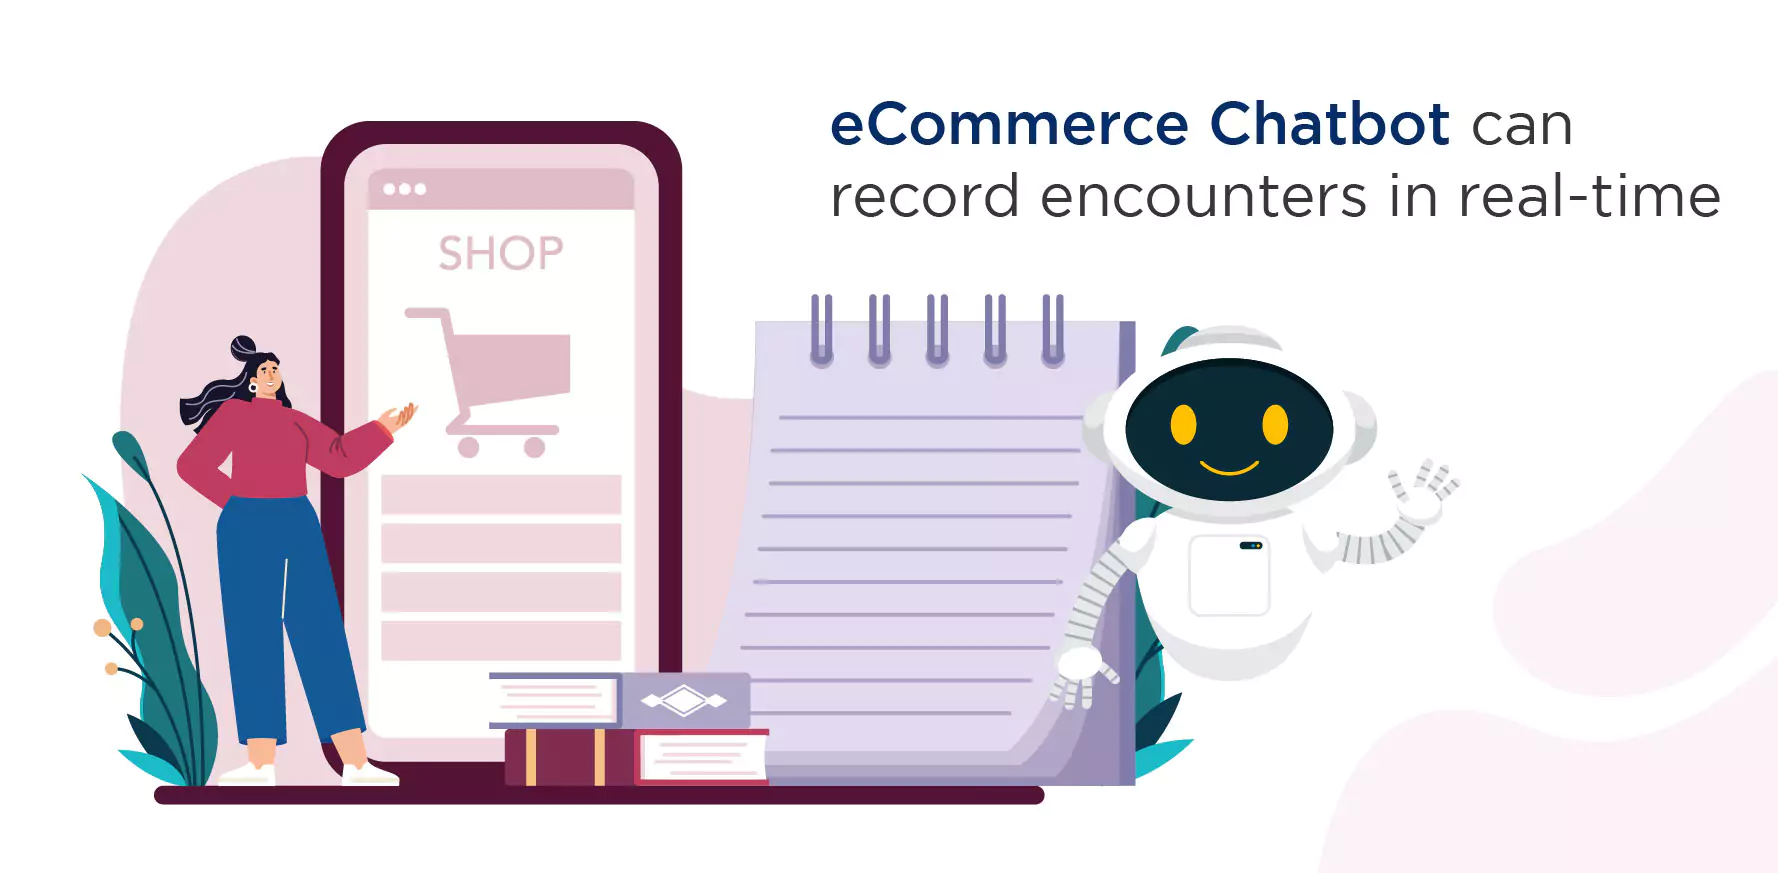 eCommerce chatbot can record encounters in real-time.